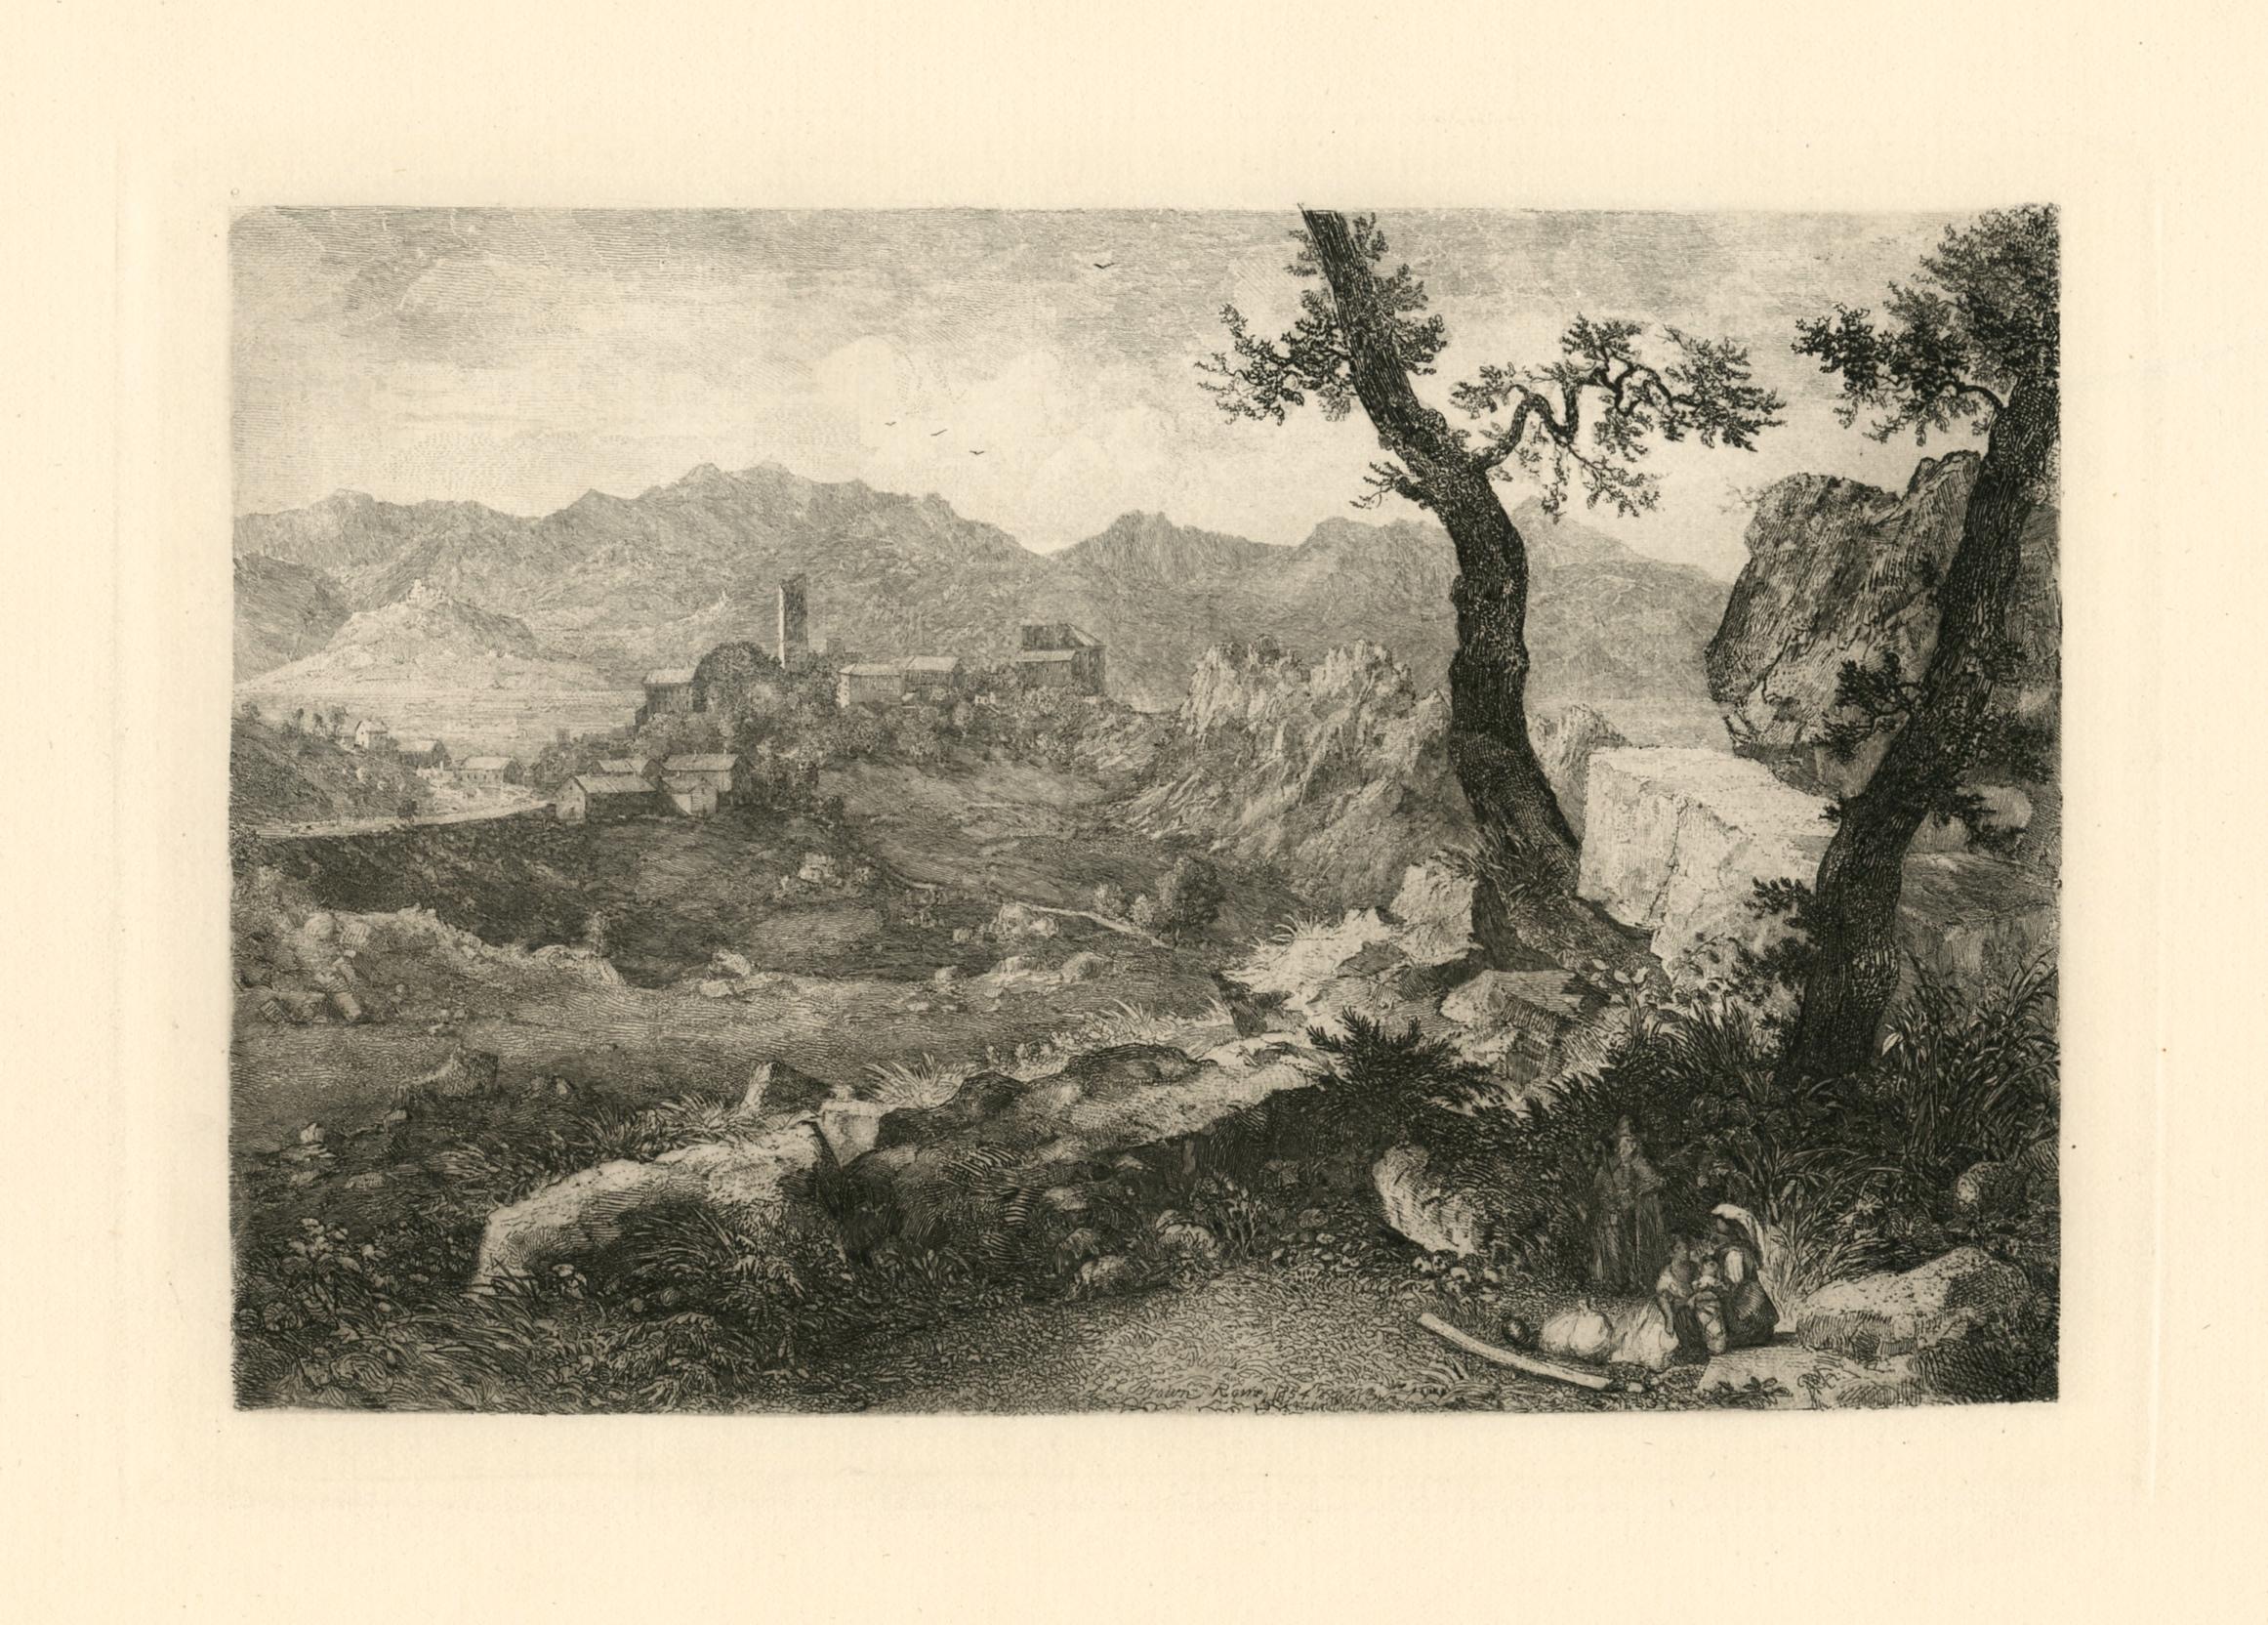 "A View near Rome" original etching - Print by George Loring Brown